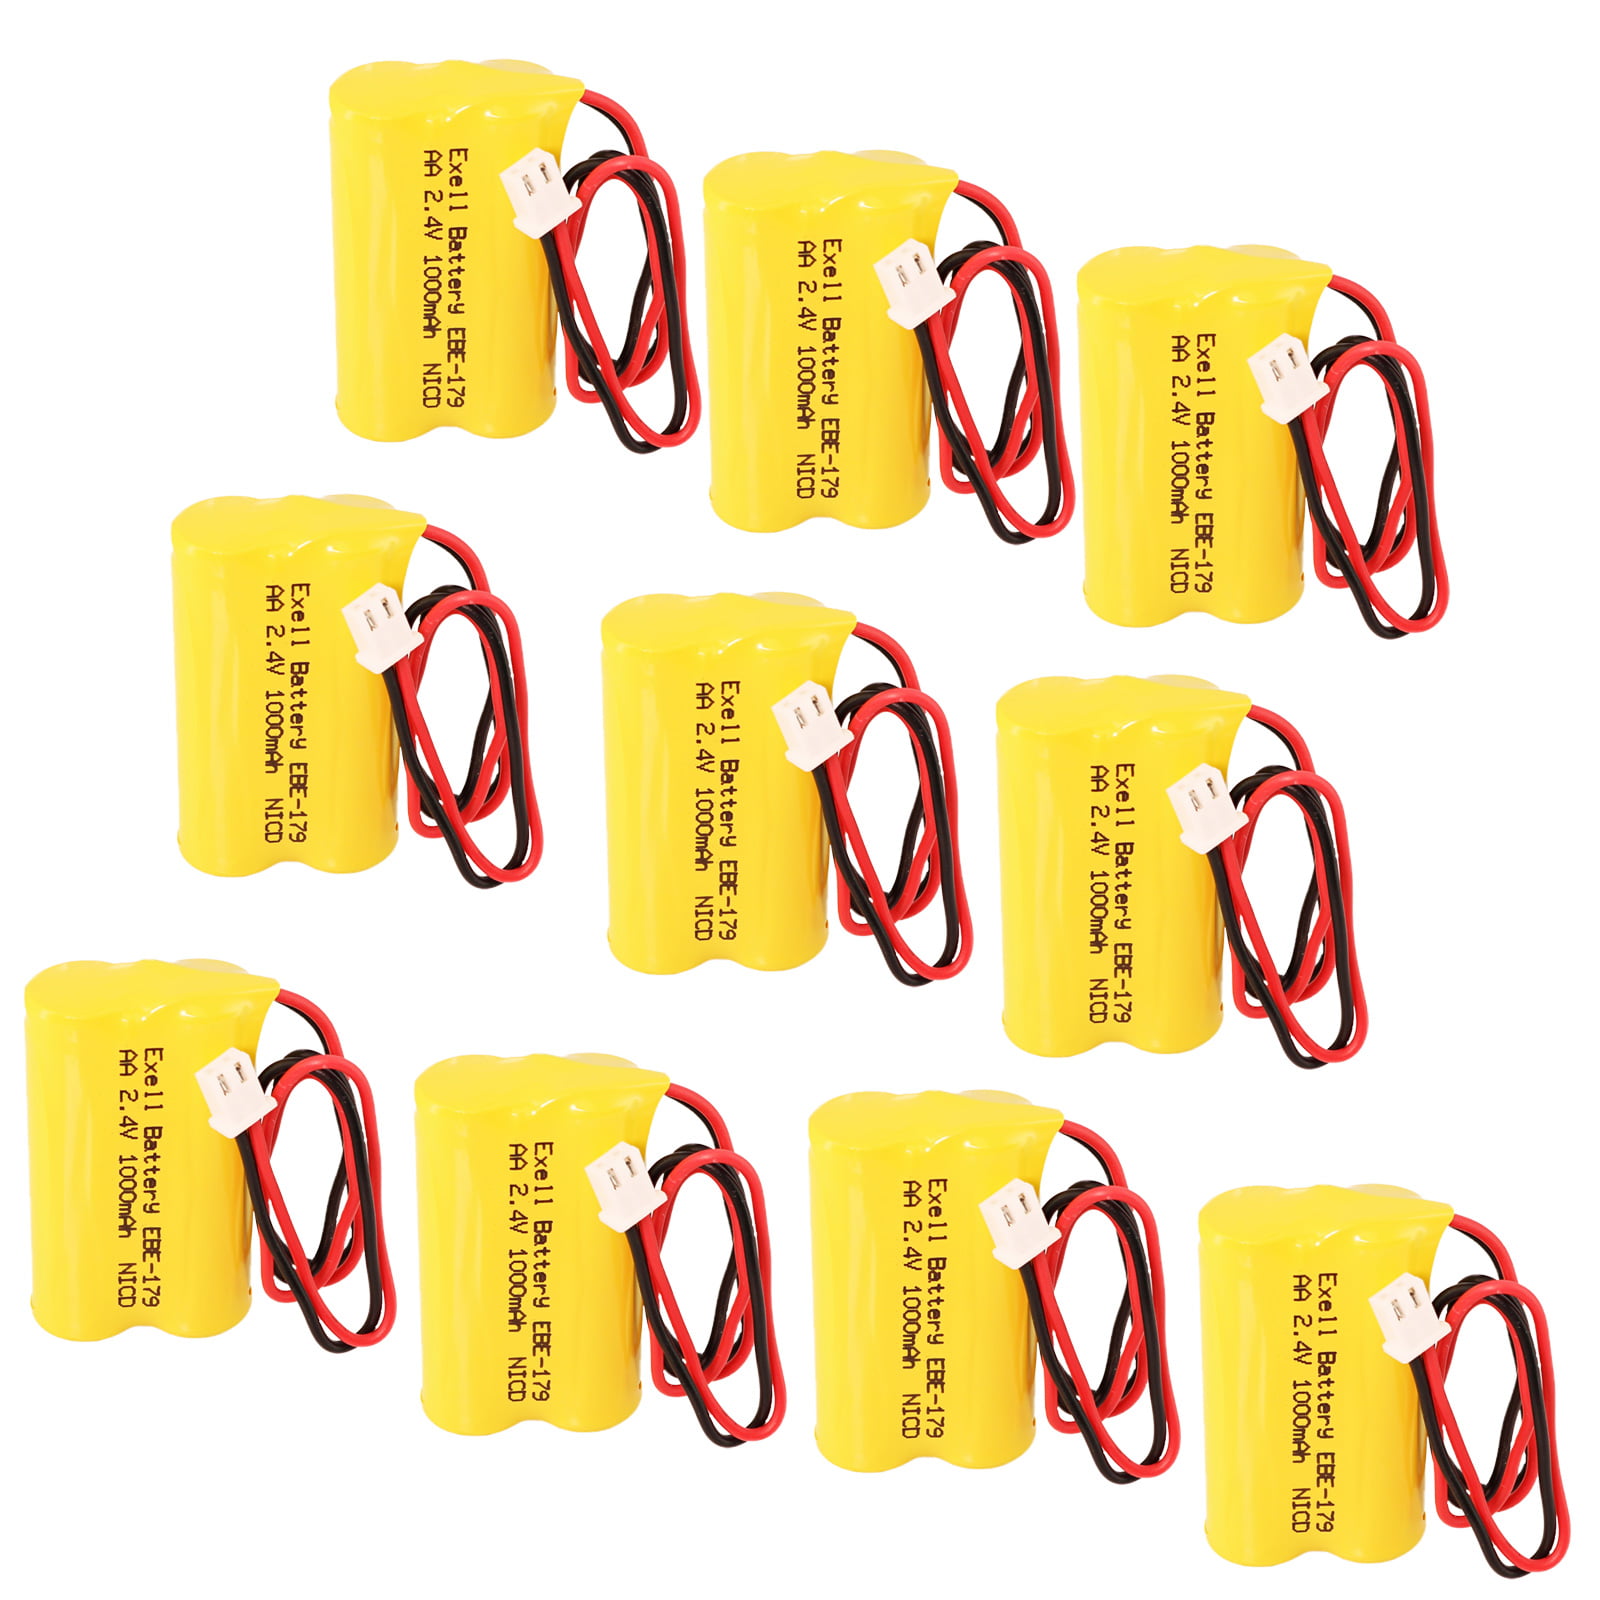 10pc Exit Light Battery For Exitronix